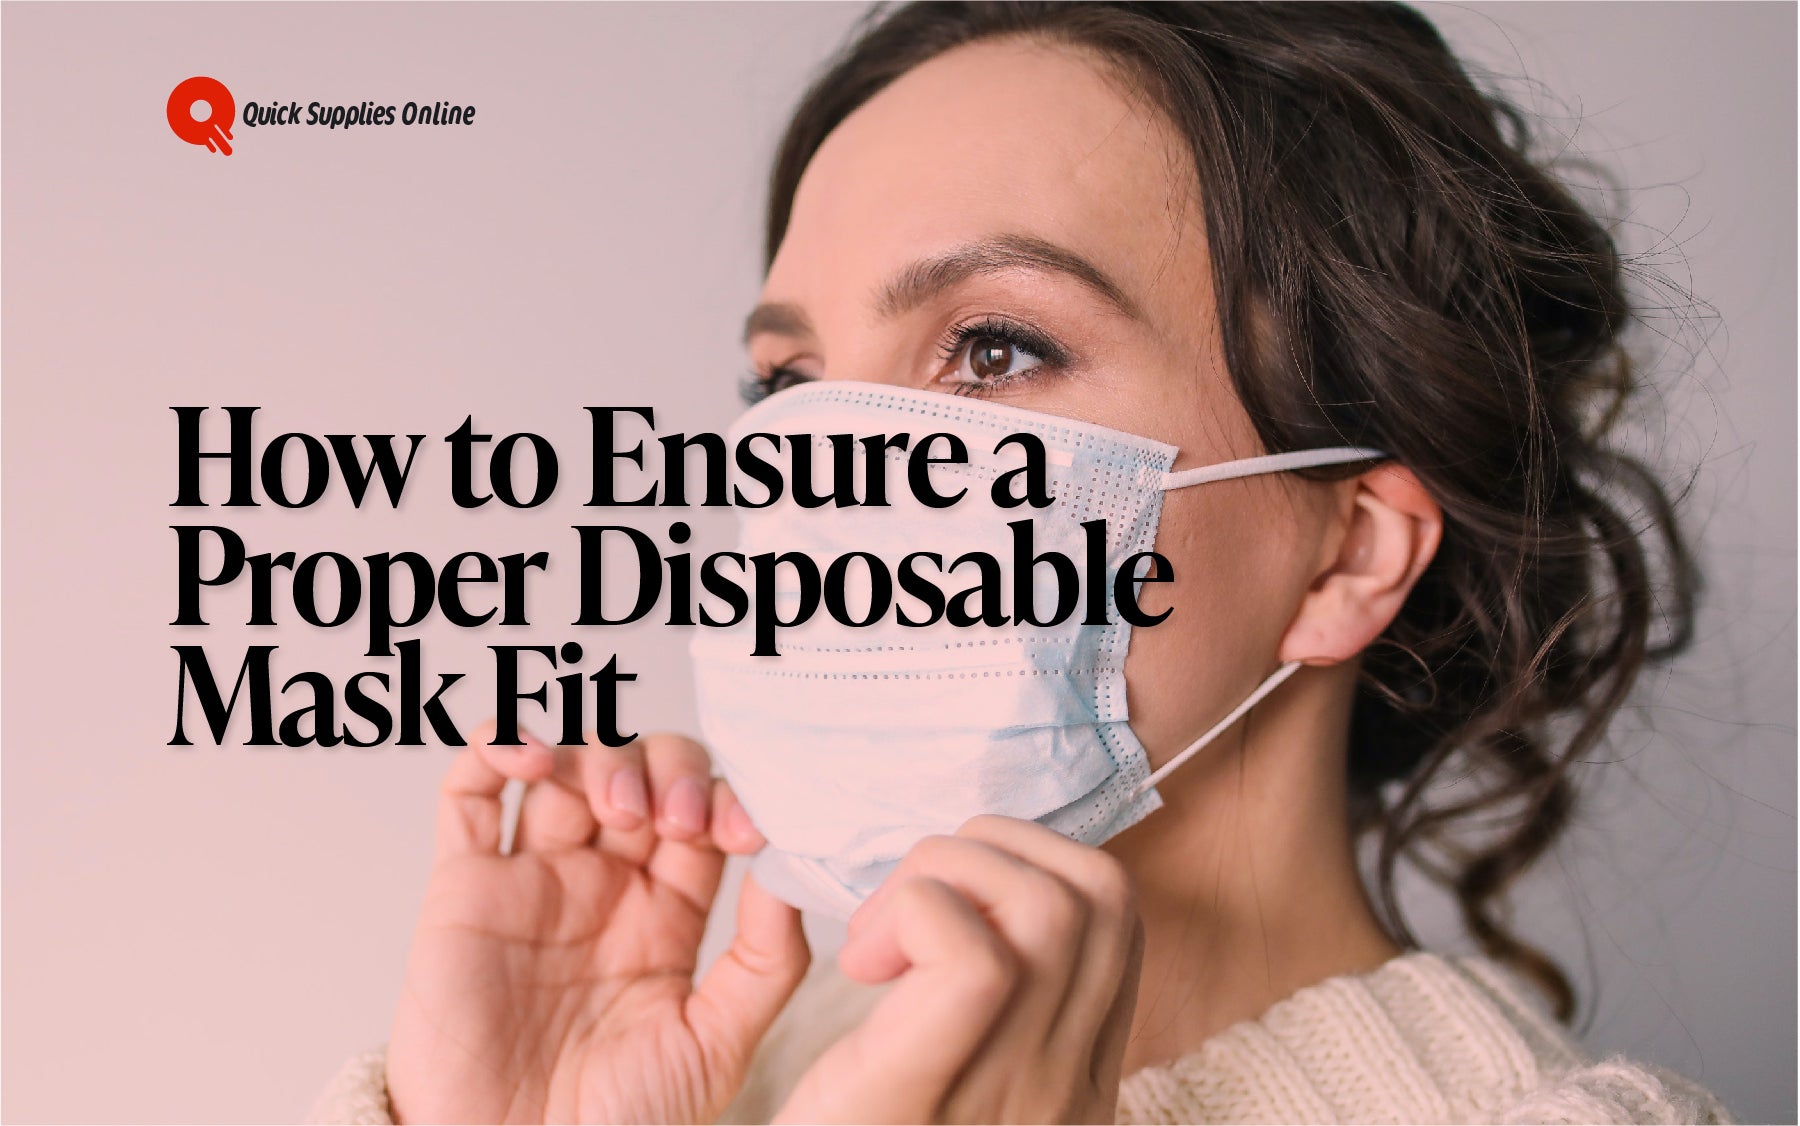 How to Ensure a Proper Disposable Mask Fit